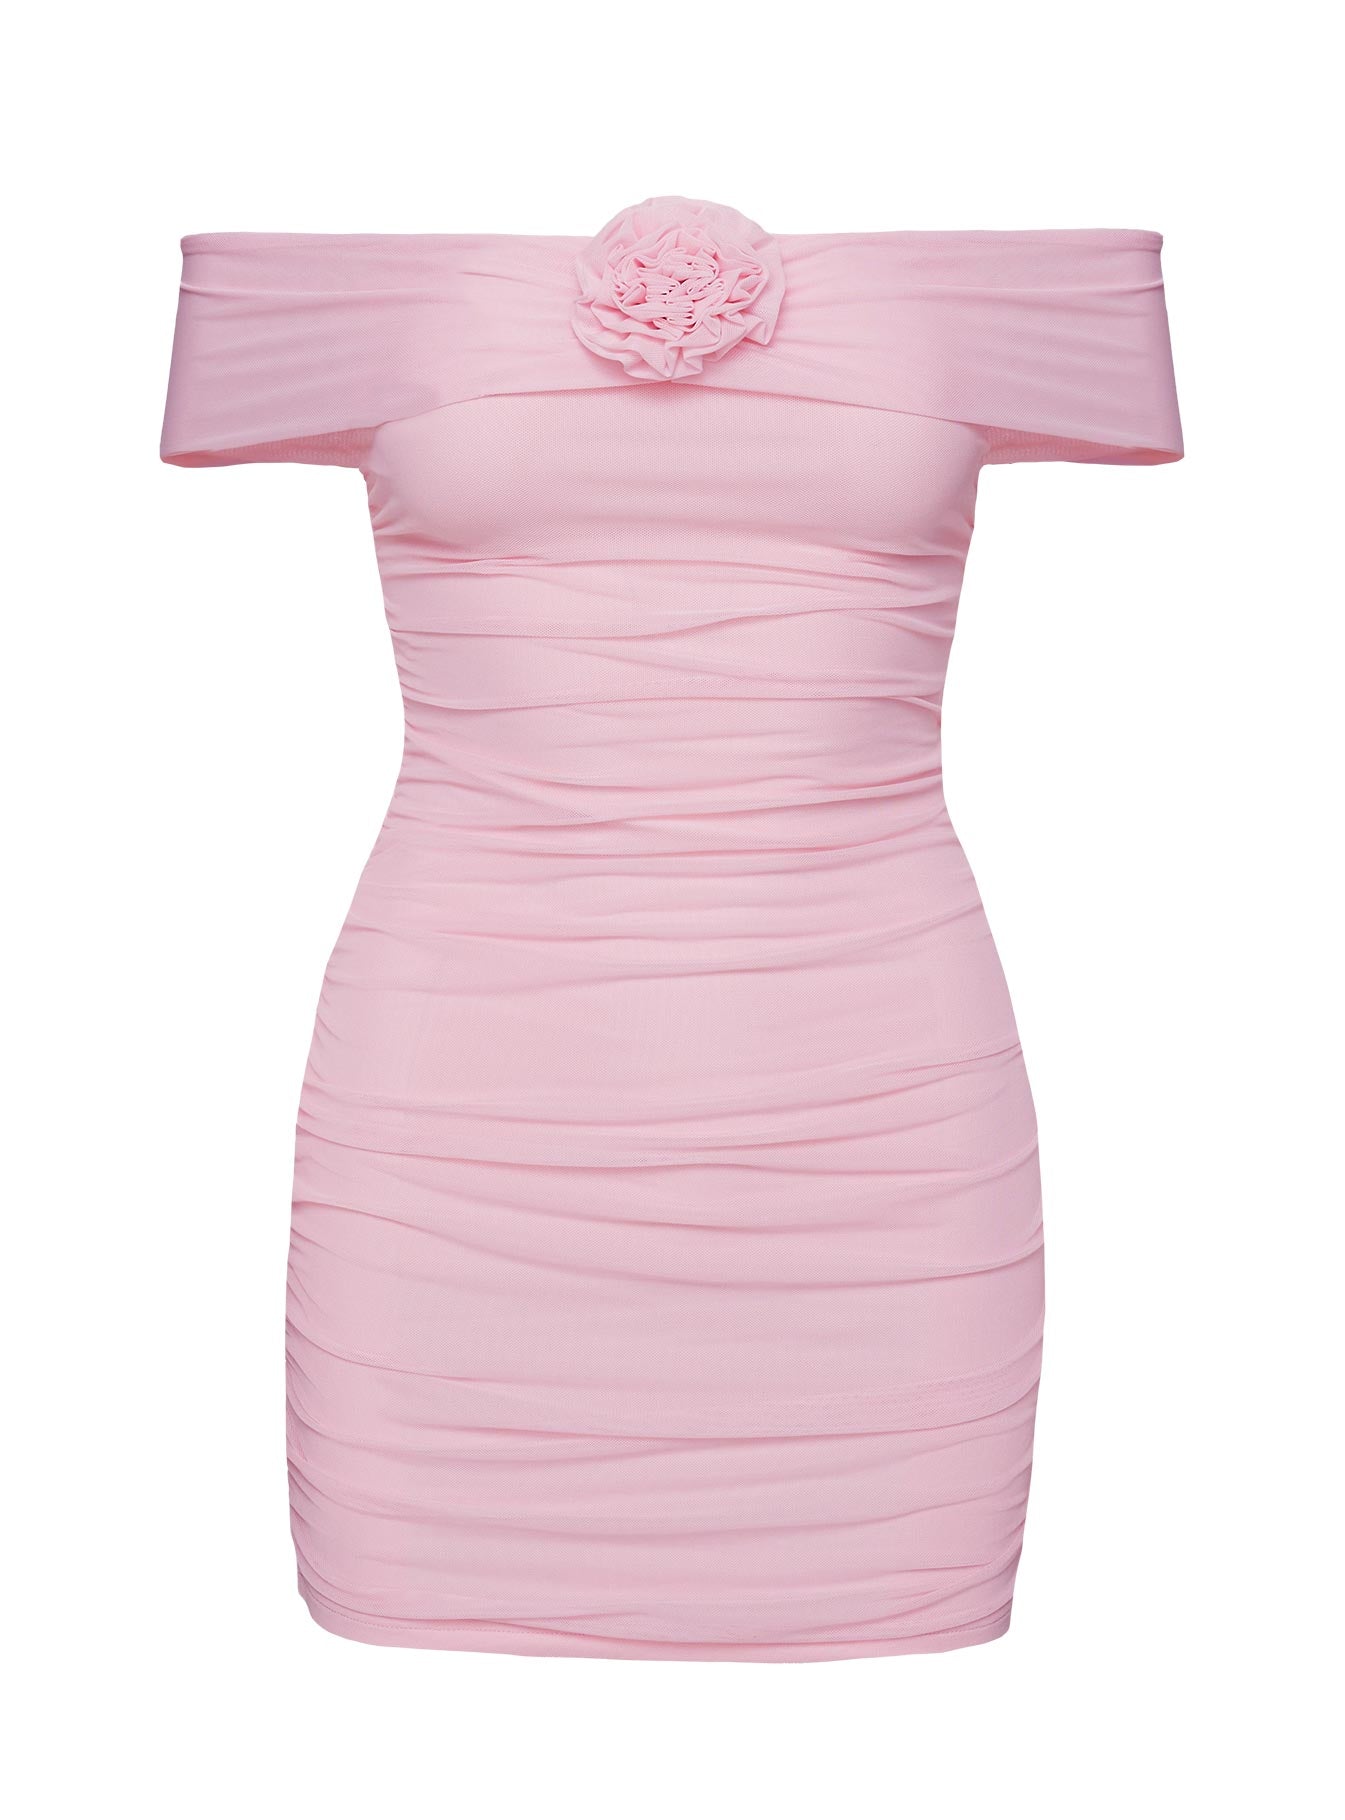 Buy Cation Pink Printed High-Low Dress for Women Online @ Tata CLiQ